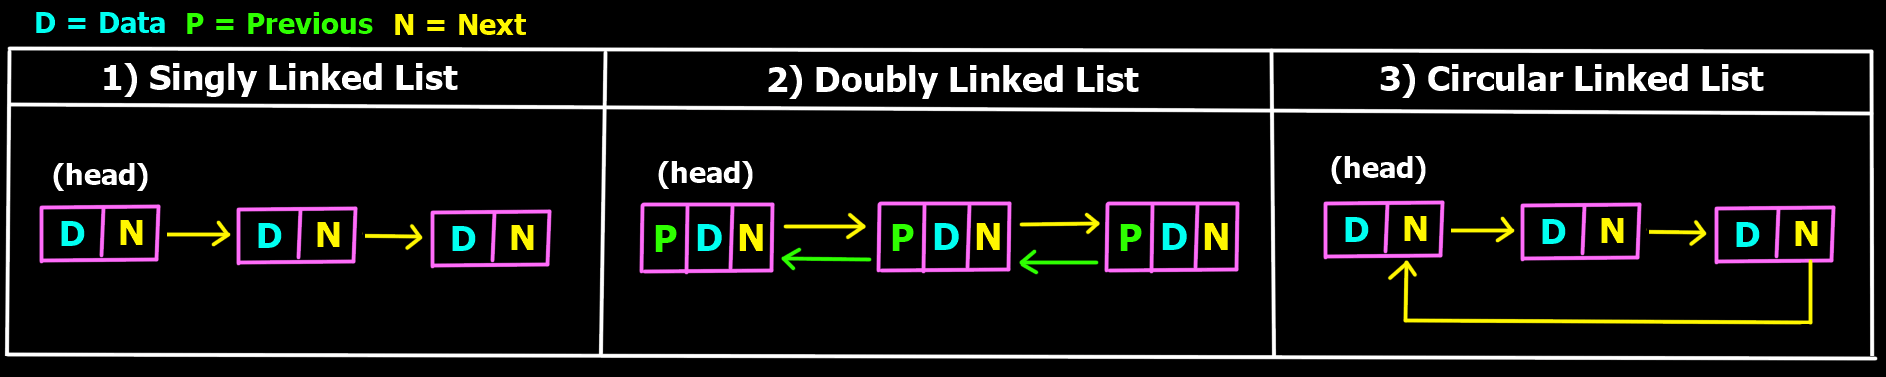 types of linked list diagram